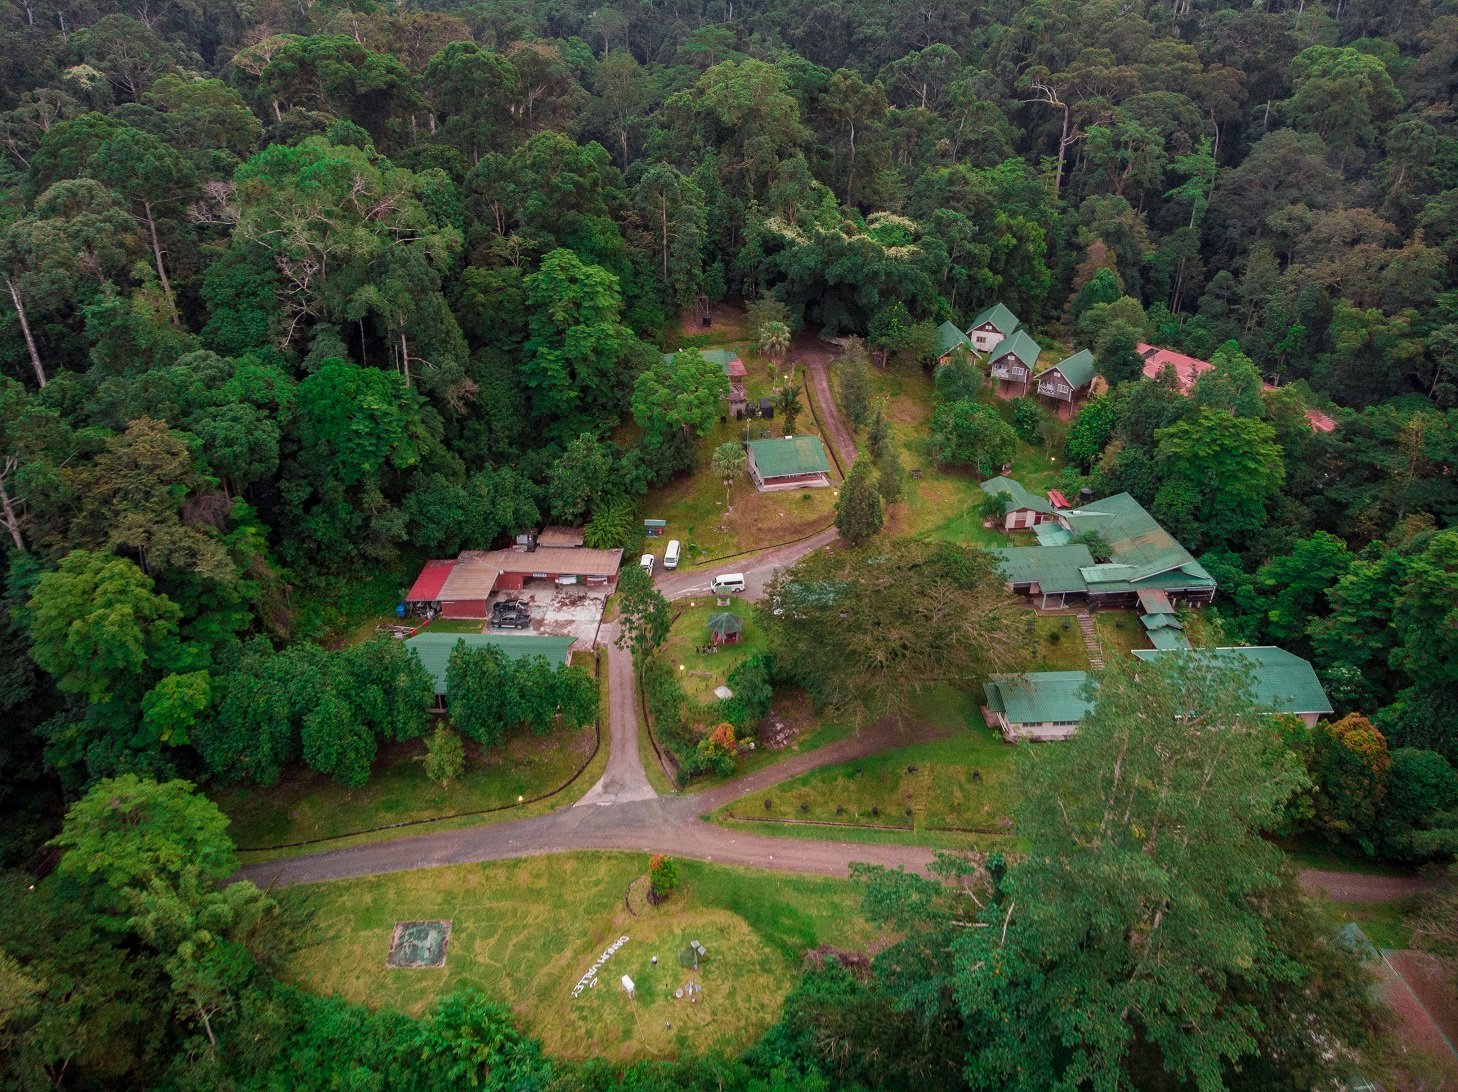 Aerial shot of Danum Valley offices / accommodation